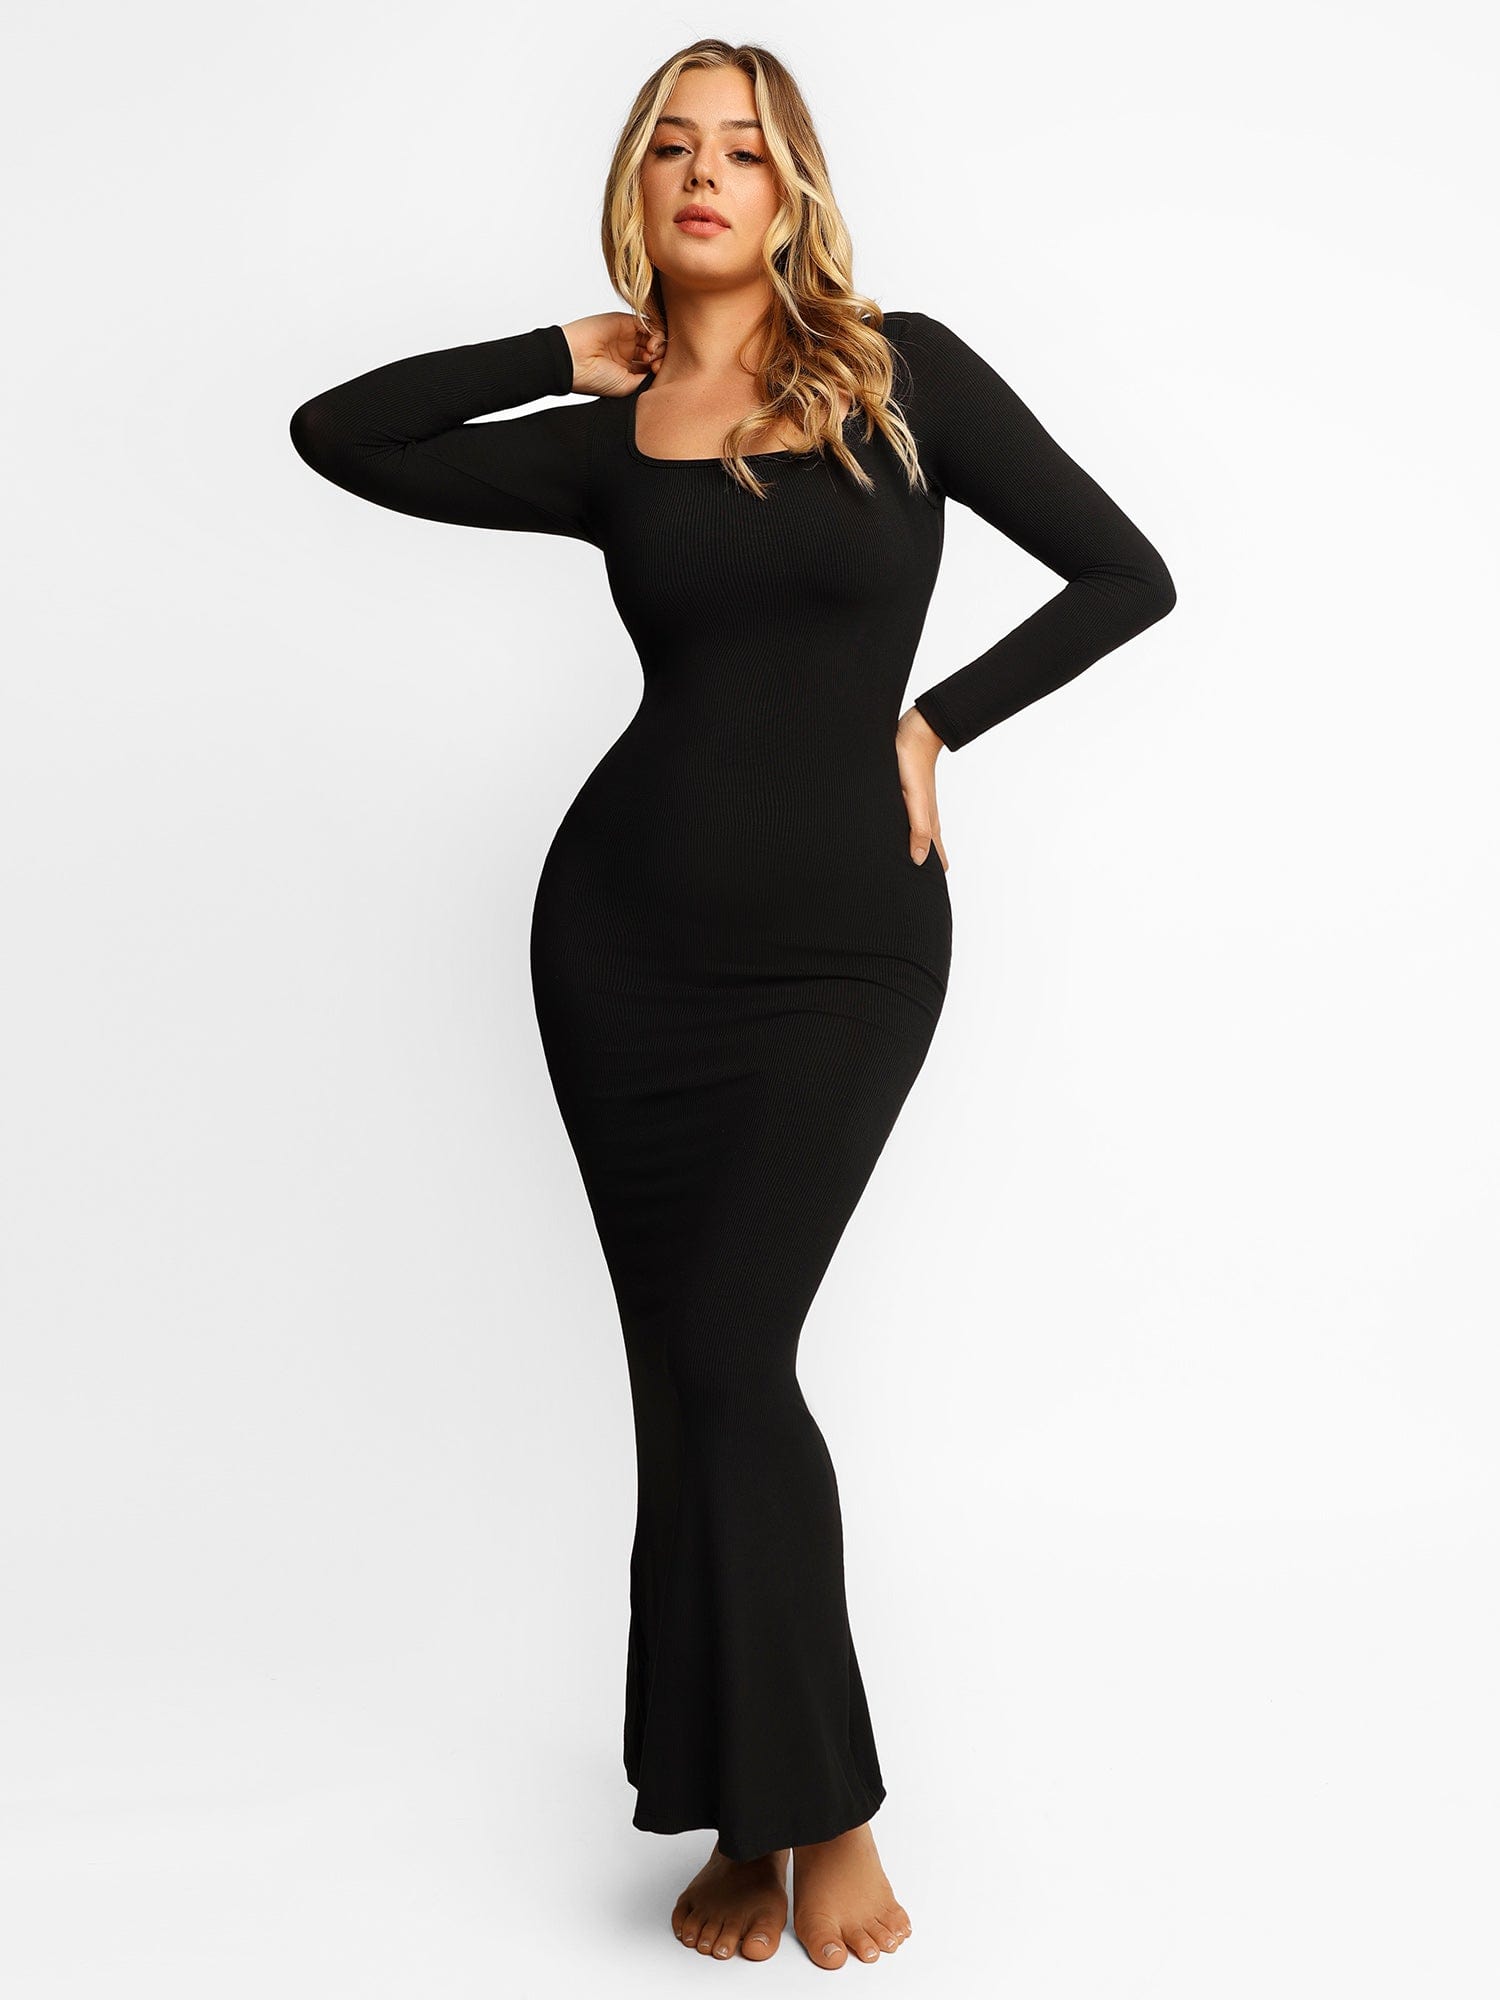 Our long sleeve lounge dress with built in shapewear is a must